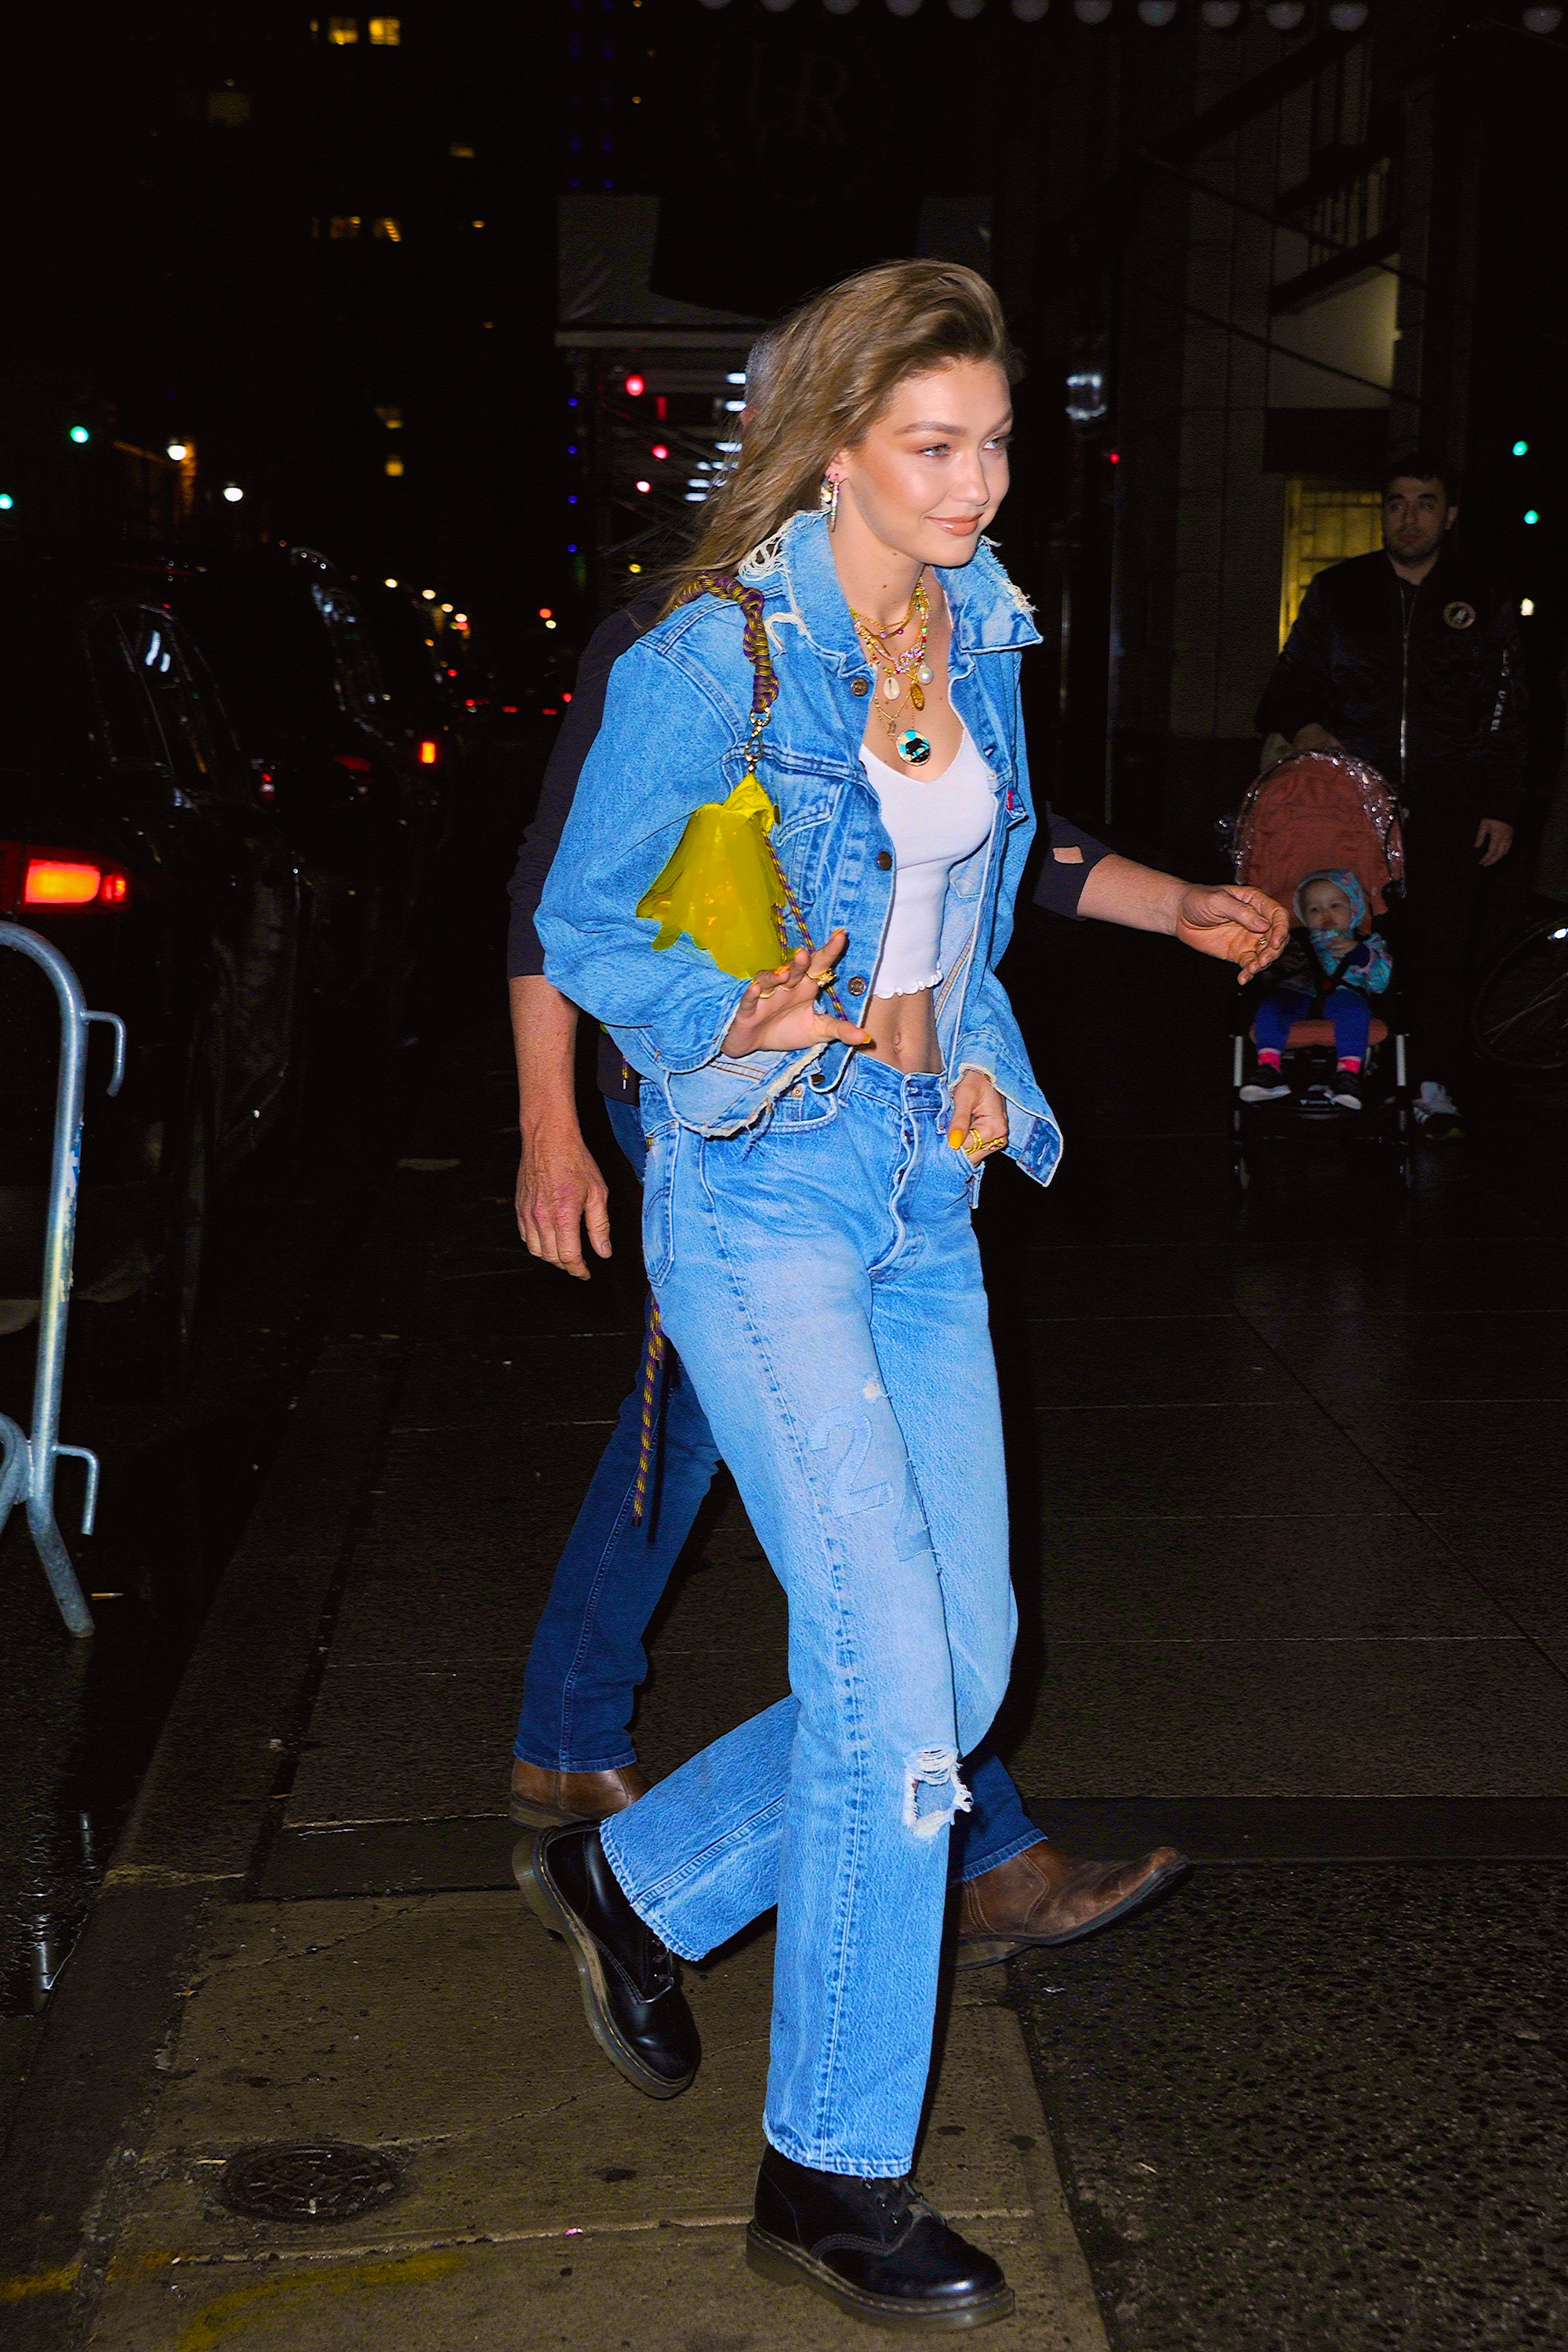 Gigi Hadid Wears Crop Top & Jeans During Day Out in NYC: Photo